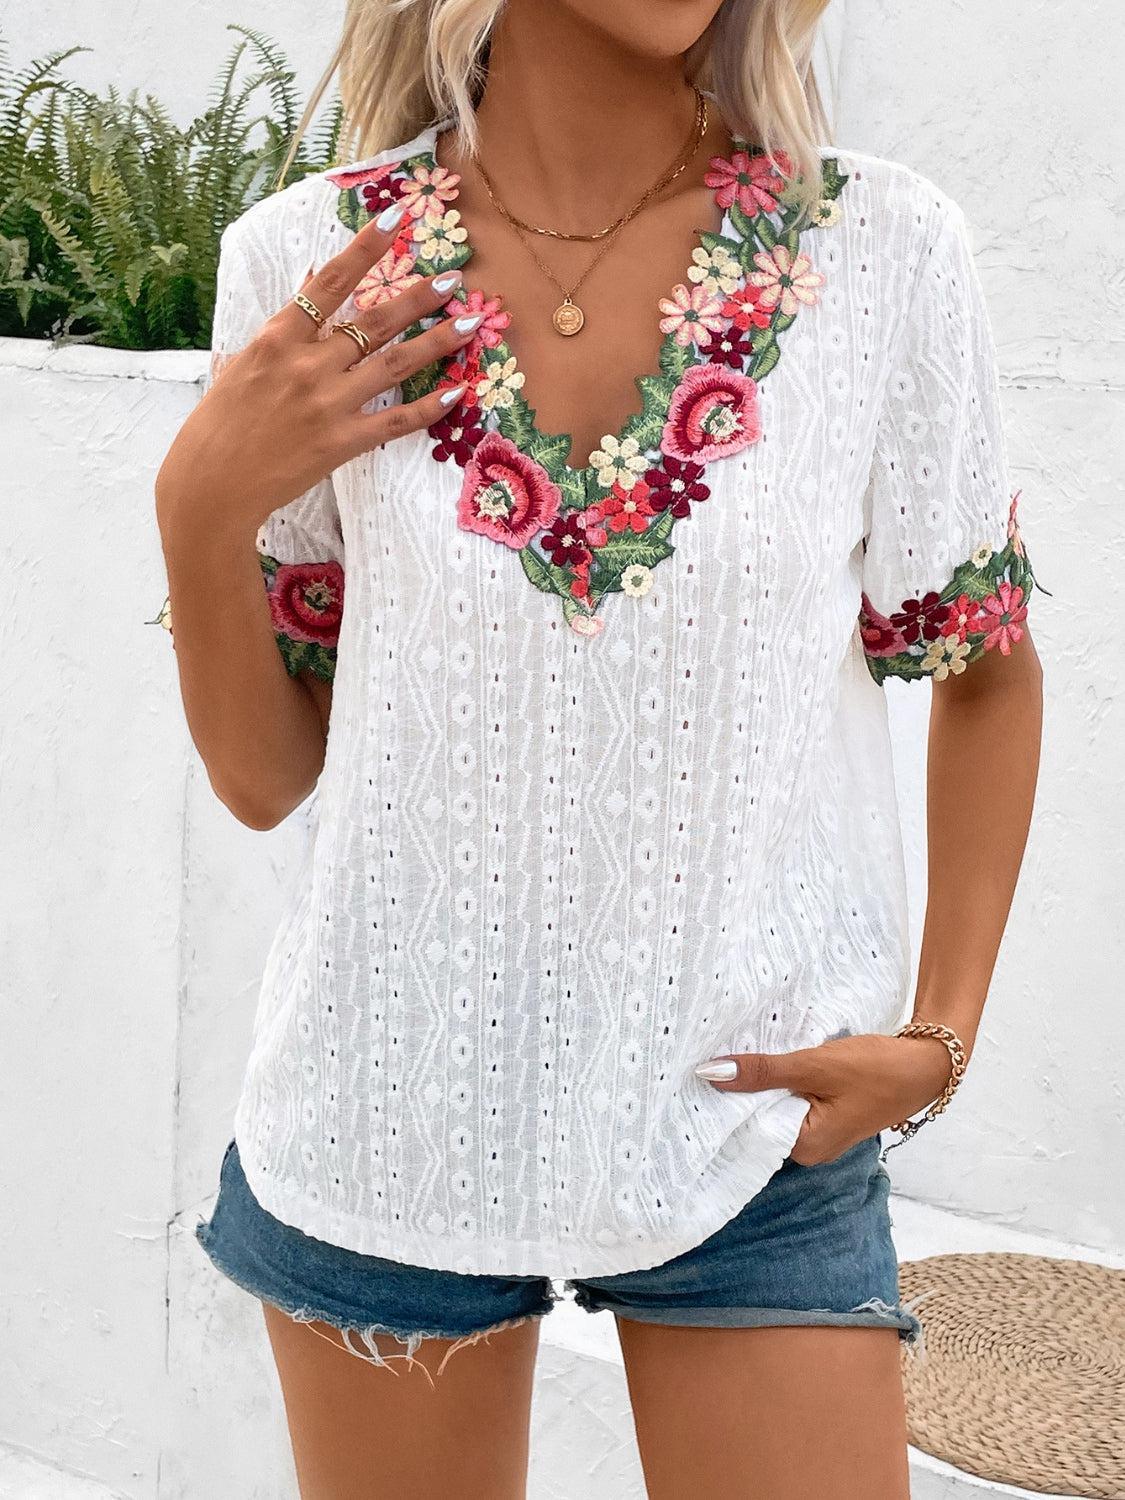 a woman wearing a white top with flowers on it